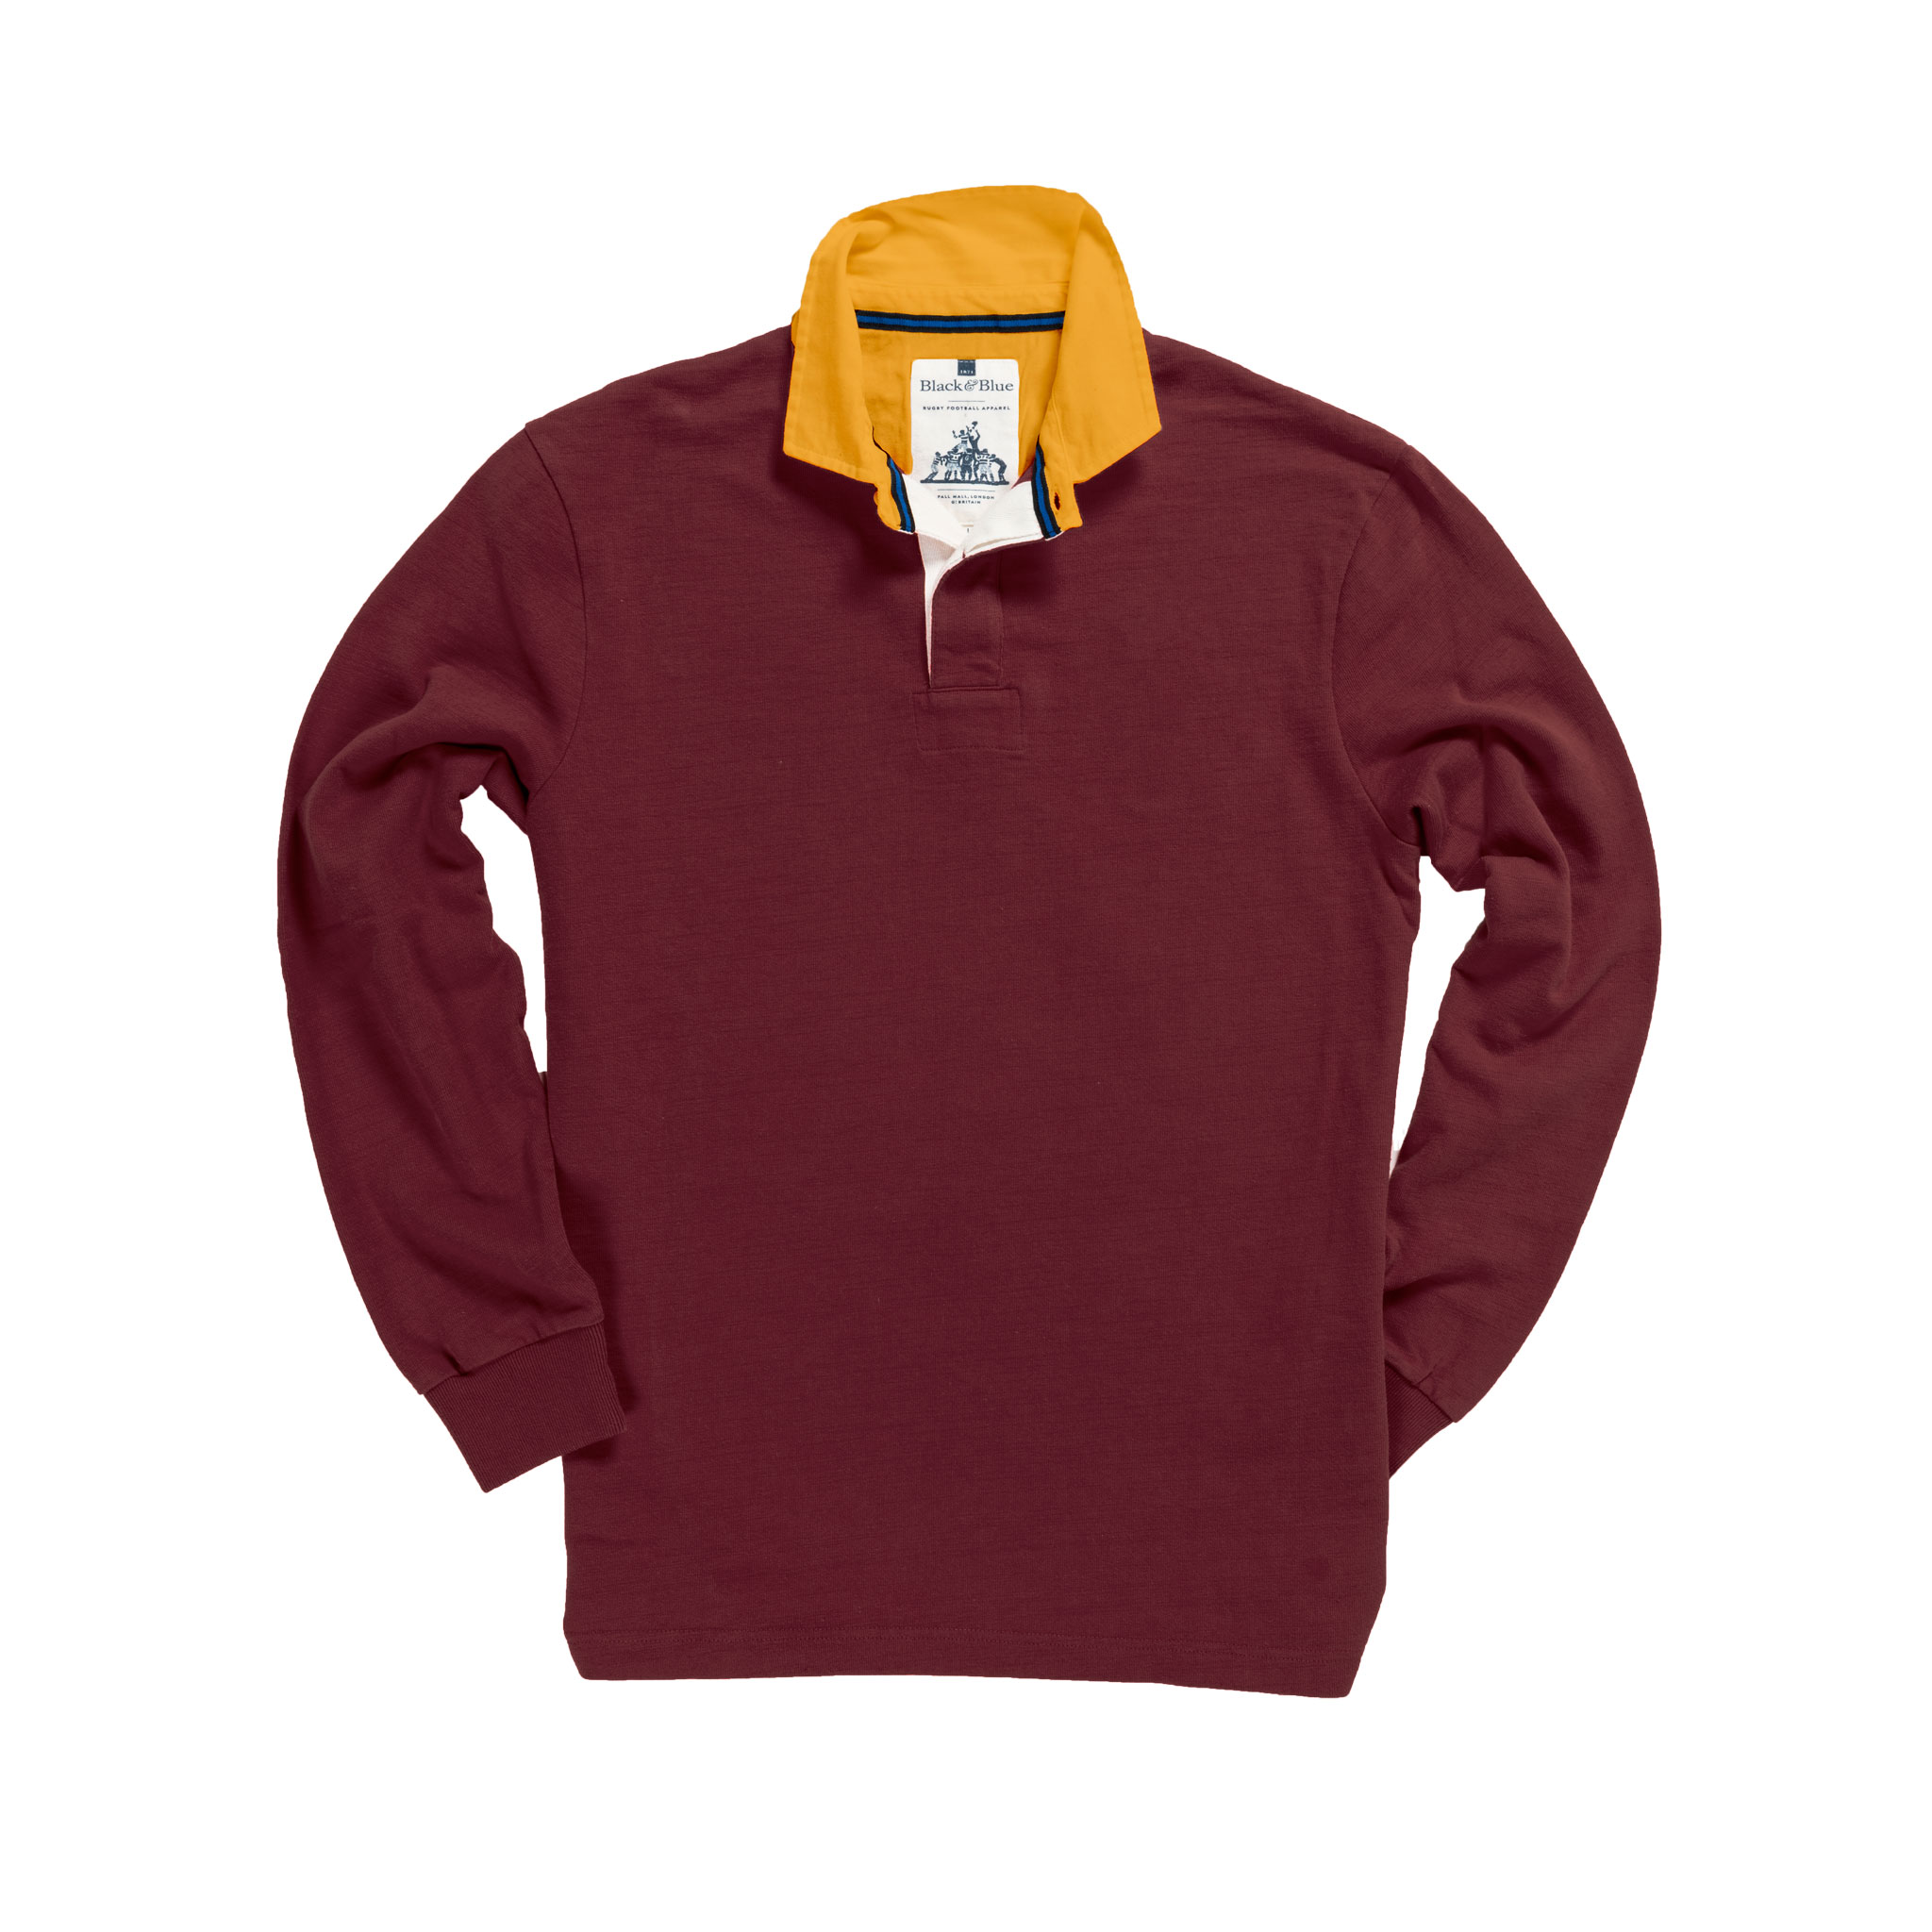 Classic Burgundy With Gold Collar 1871 Vintage Rugby Shirt